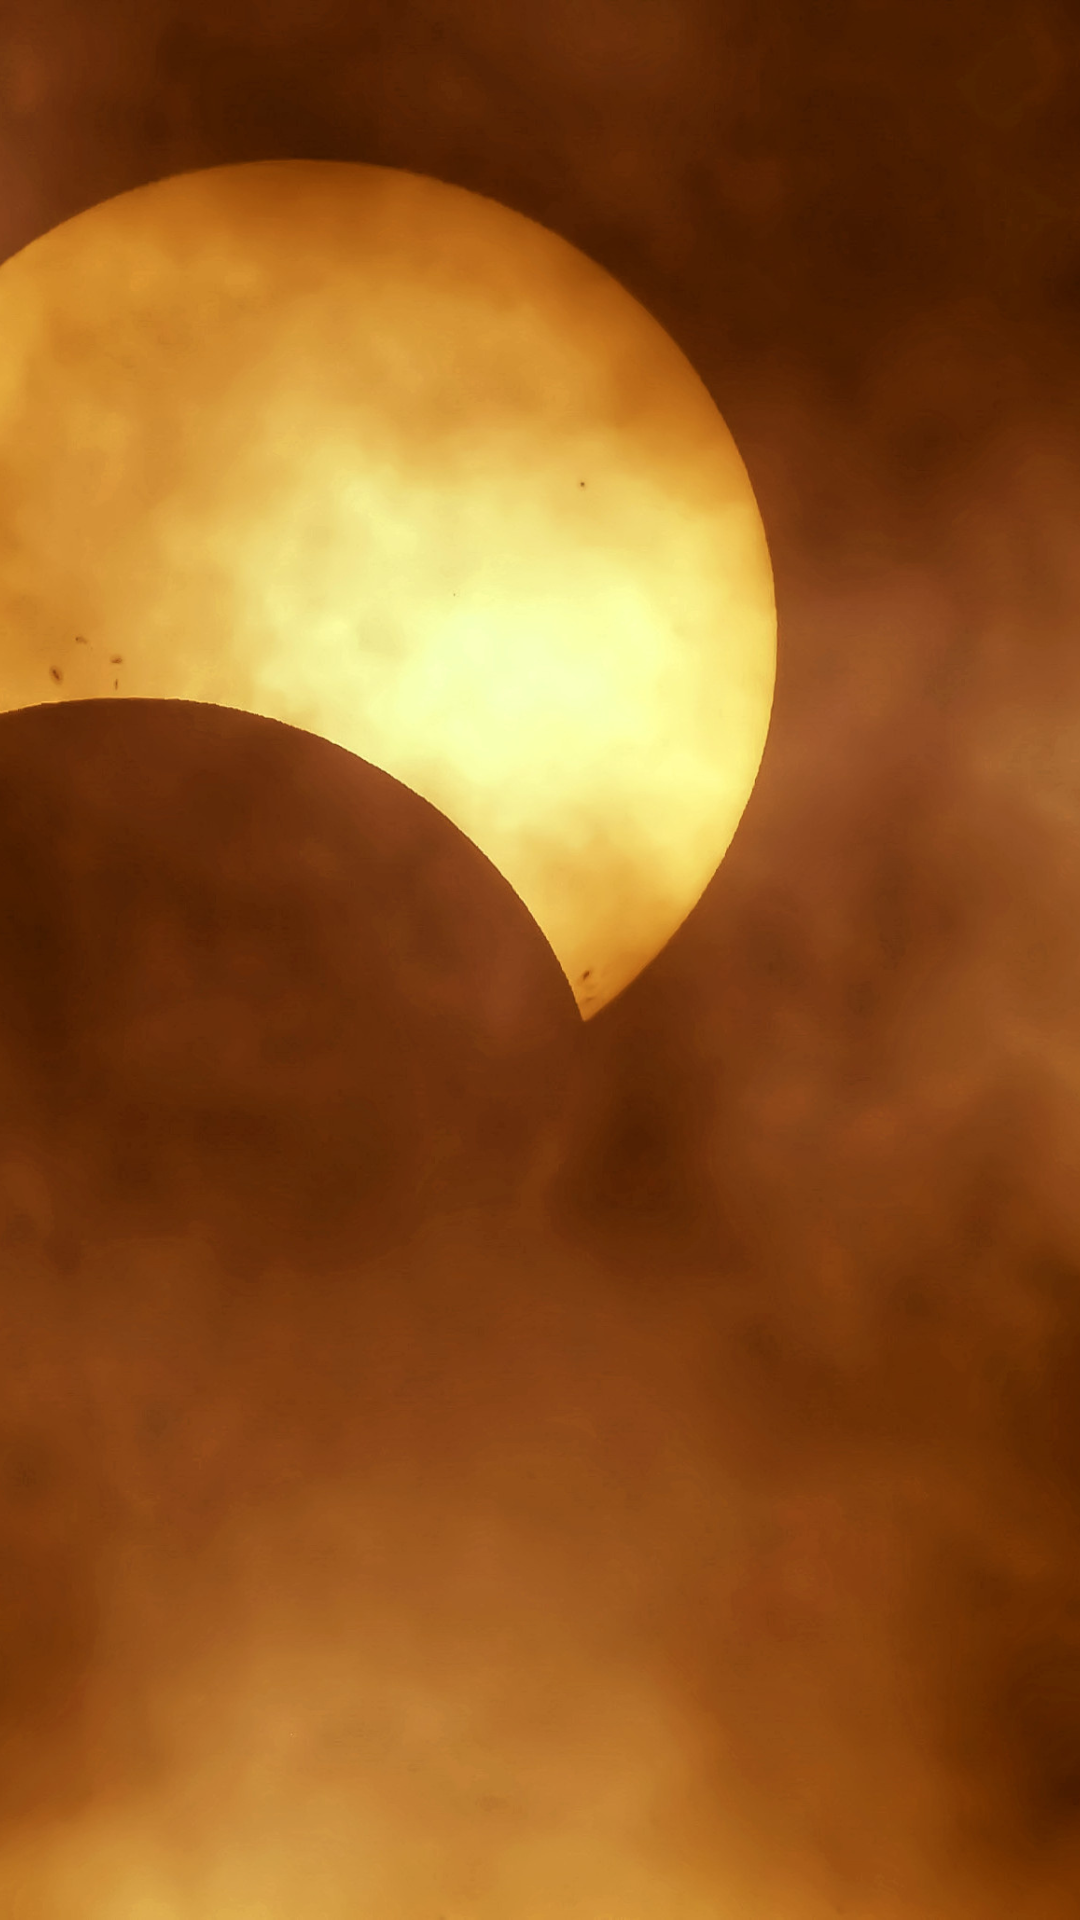 Solar Eclipse Photo, Image, Picture. Stunning Photo of Hybrid Solar Eclipses